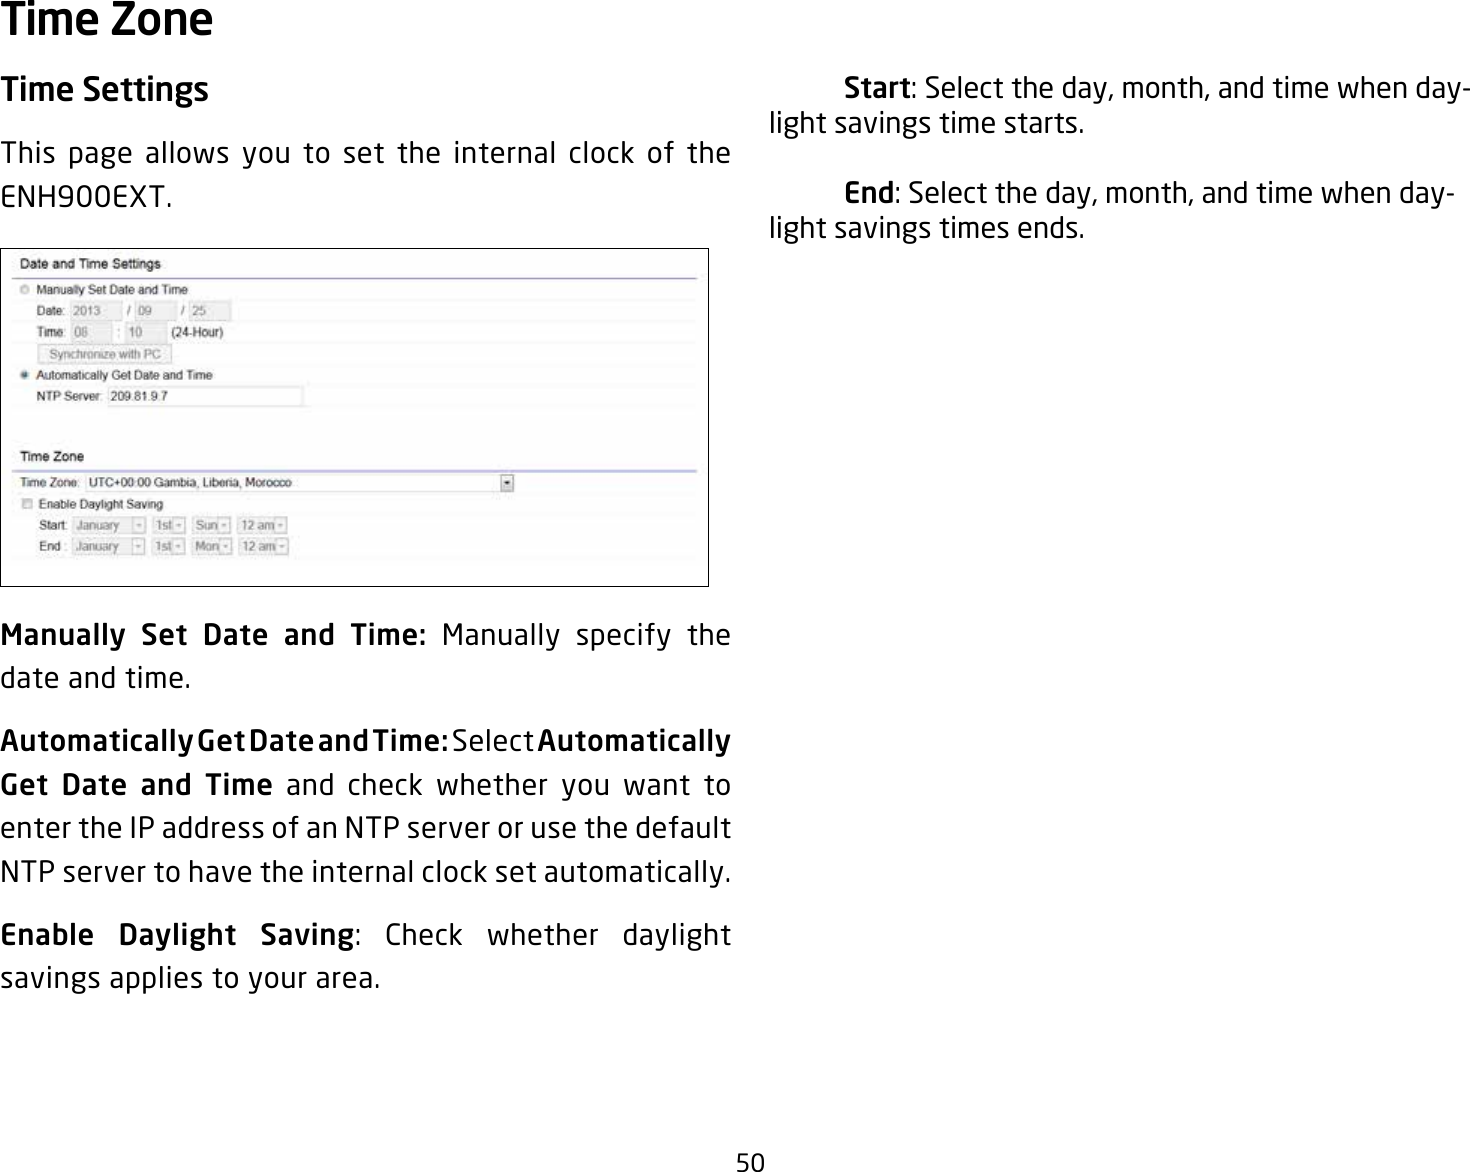 50Time SettingsThis page allows you to set the internal clock of the ENH900EXT.Manually  Set  Date  and  Time:  Manually specify the date and time.Automatically Get Date and Time: Select Automatically Get  Date  and  Time and check whether you want to enter the IP address of an NTP server or use the default NTP server to have the internal clock set automatically.Enable Daylight Saving: Check whether daylight savings applies to your area. Start: Select the day, month, and time when day-light savings time starts. End: Select the day, month, and time when day-light savings times ends.Time Zone